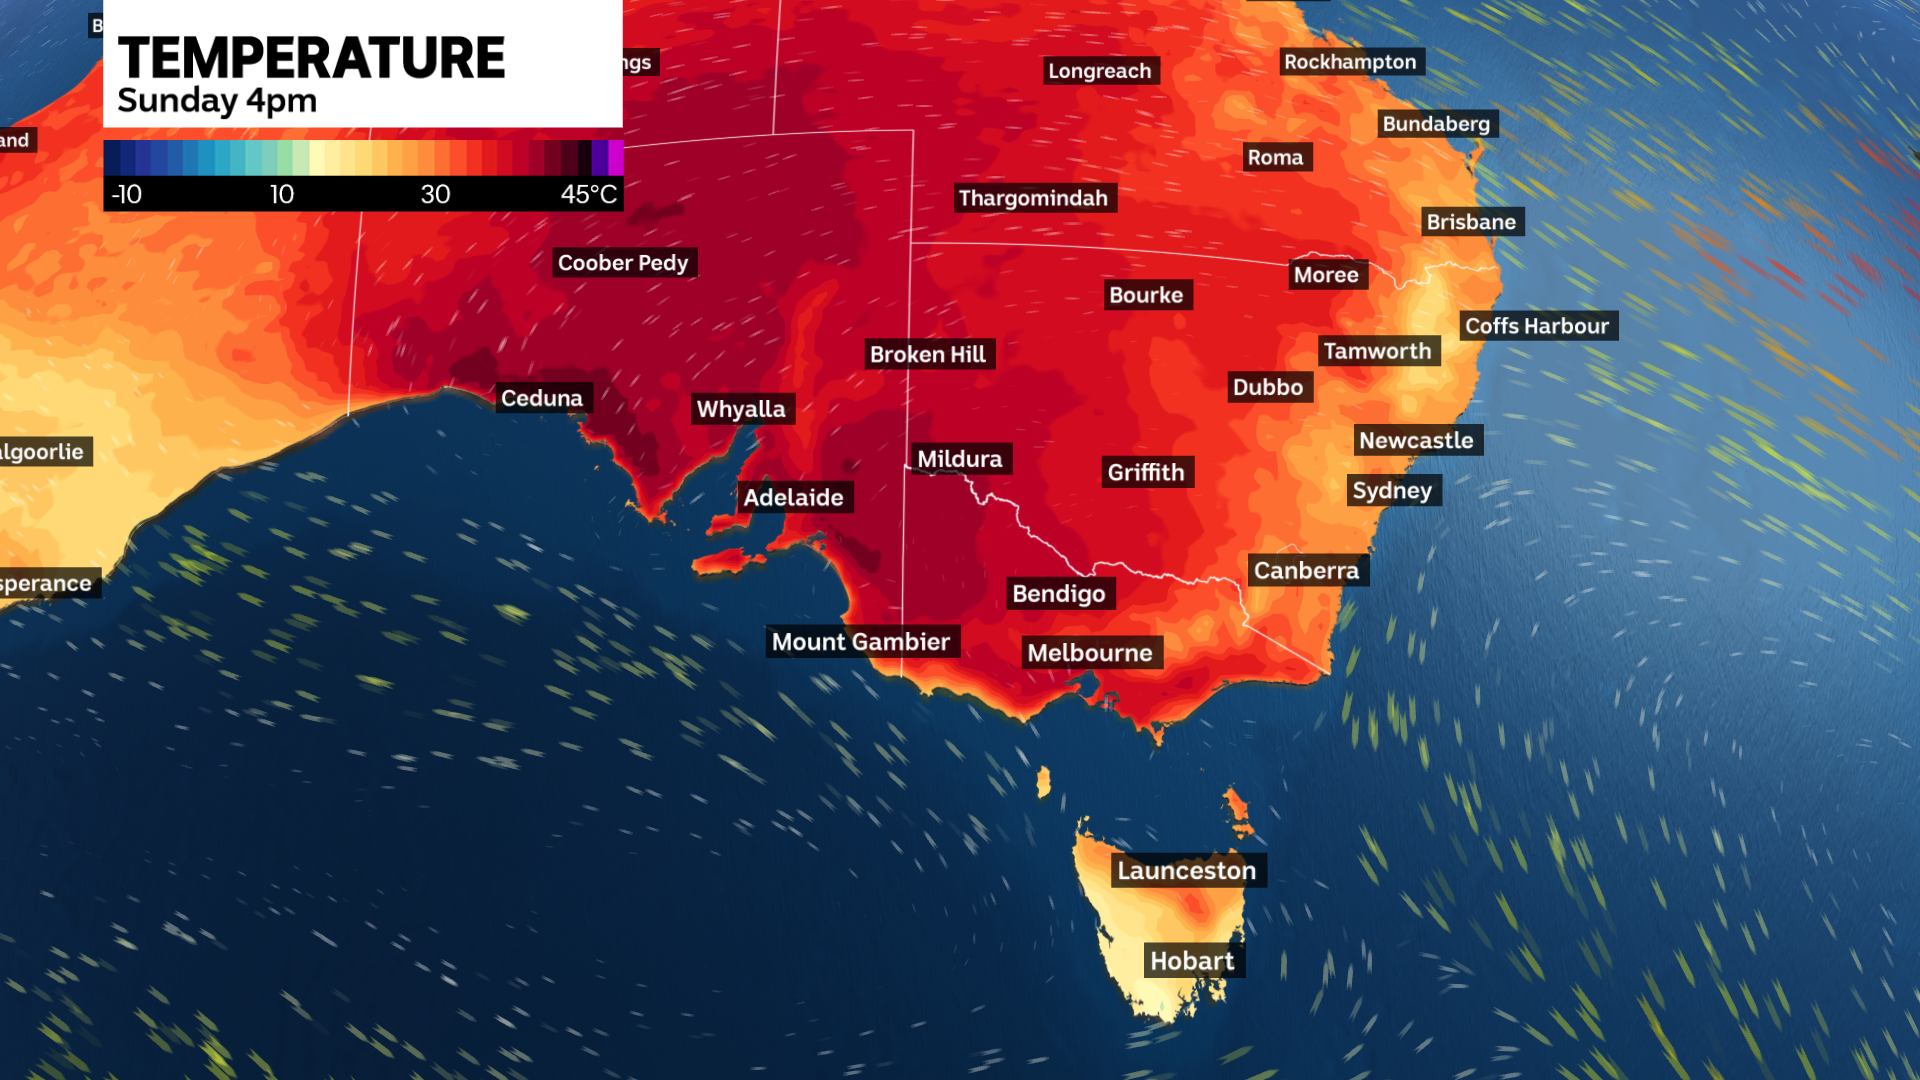 weather map shows how Sunday afternoon will reach around 40C